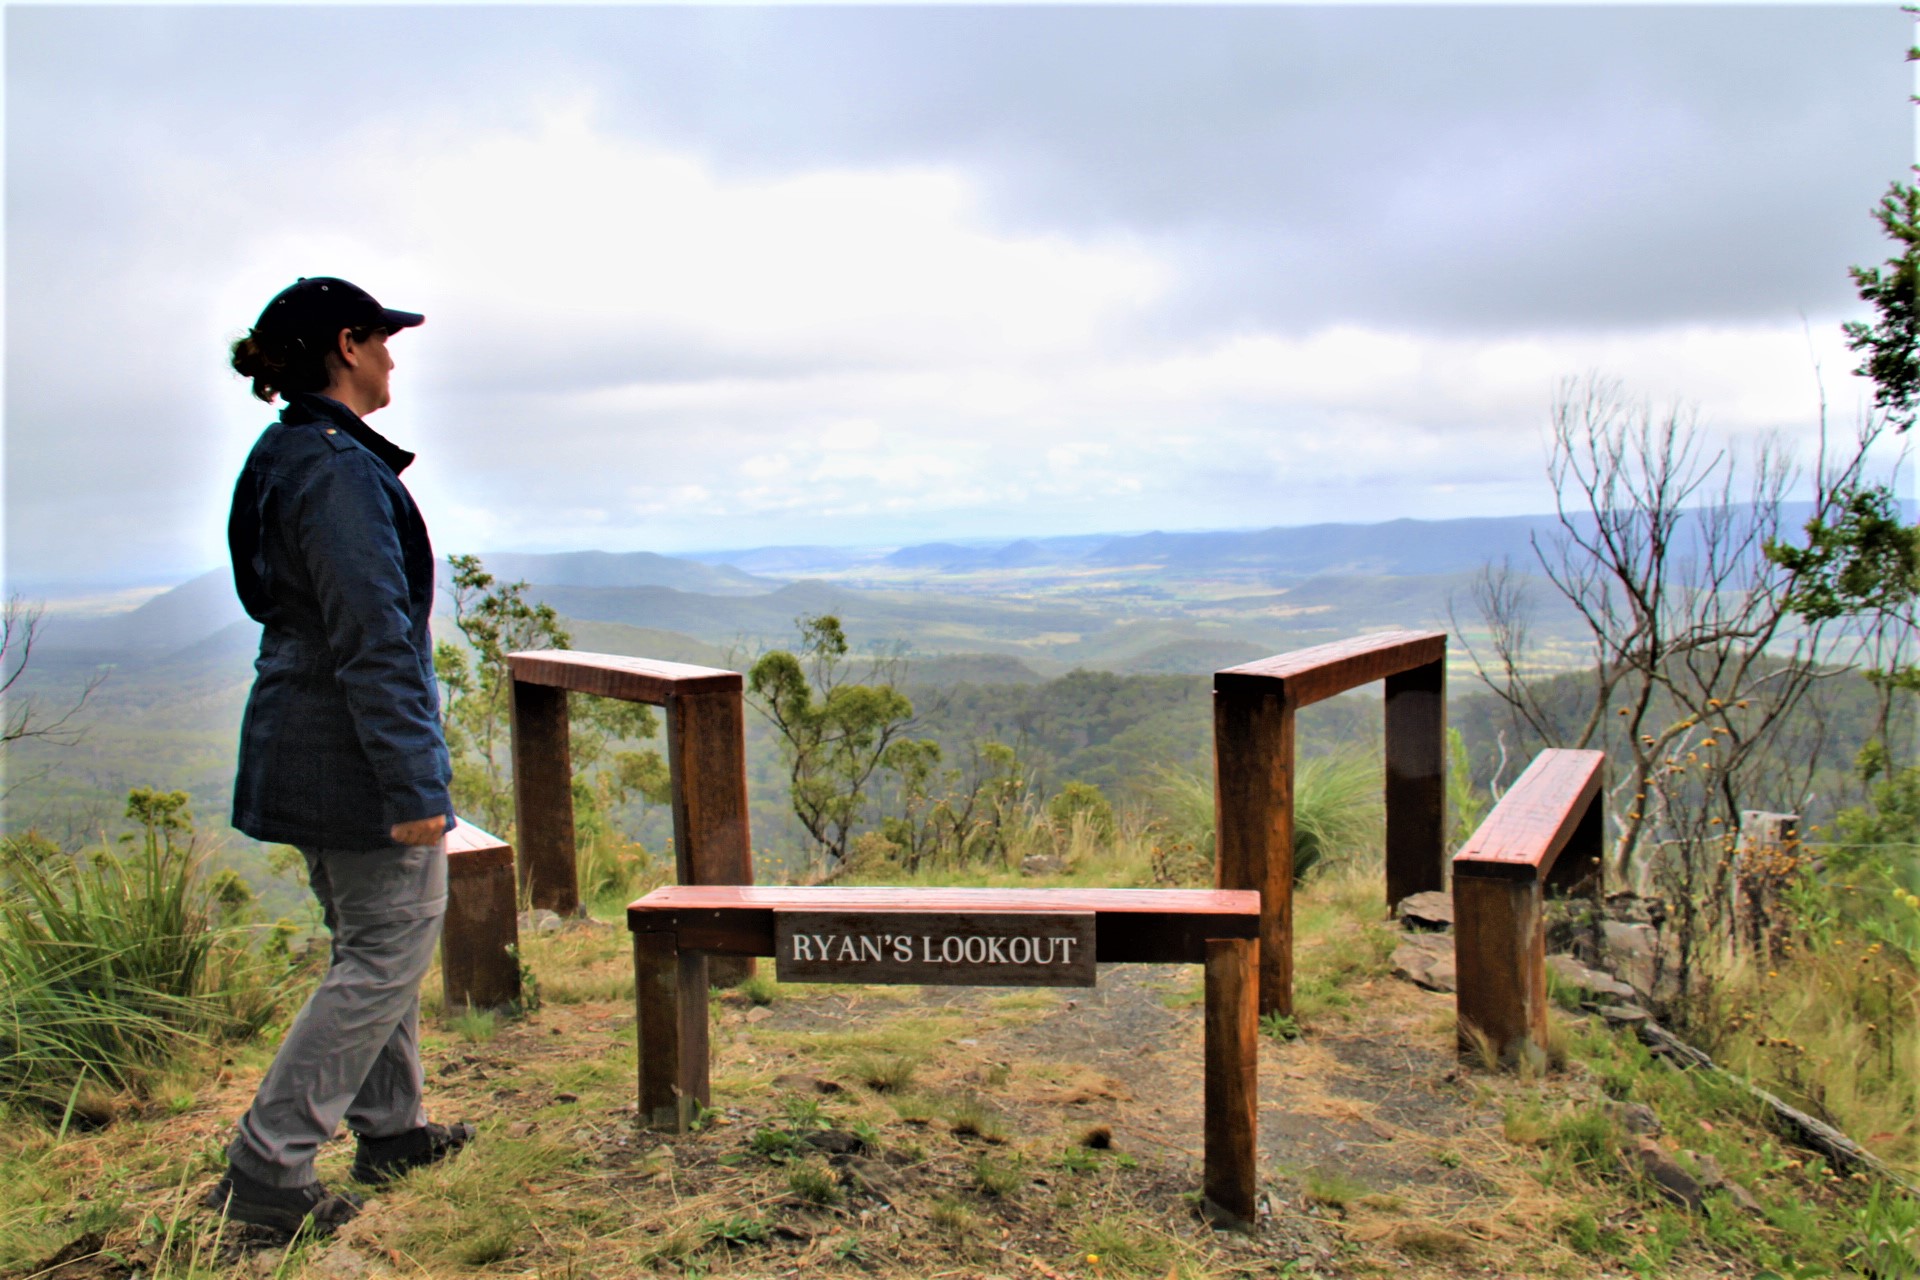 In rarefied air: living it up on the Scenic Rim